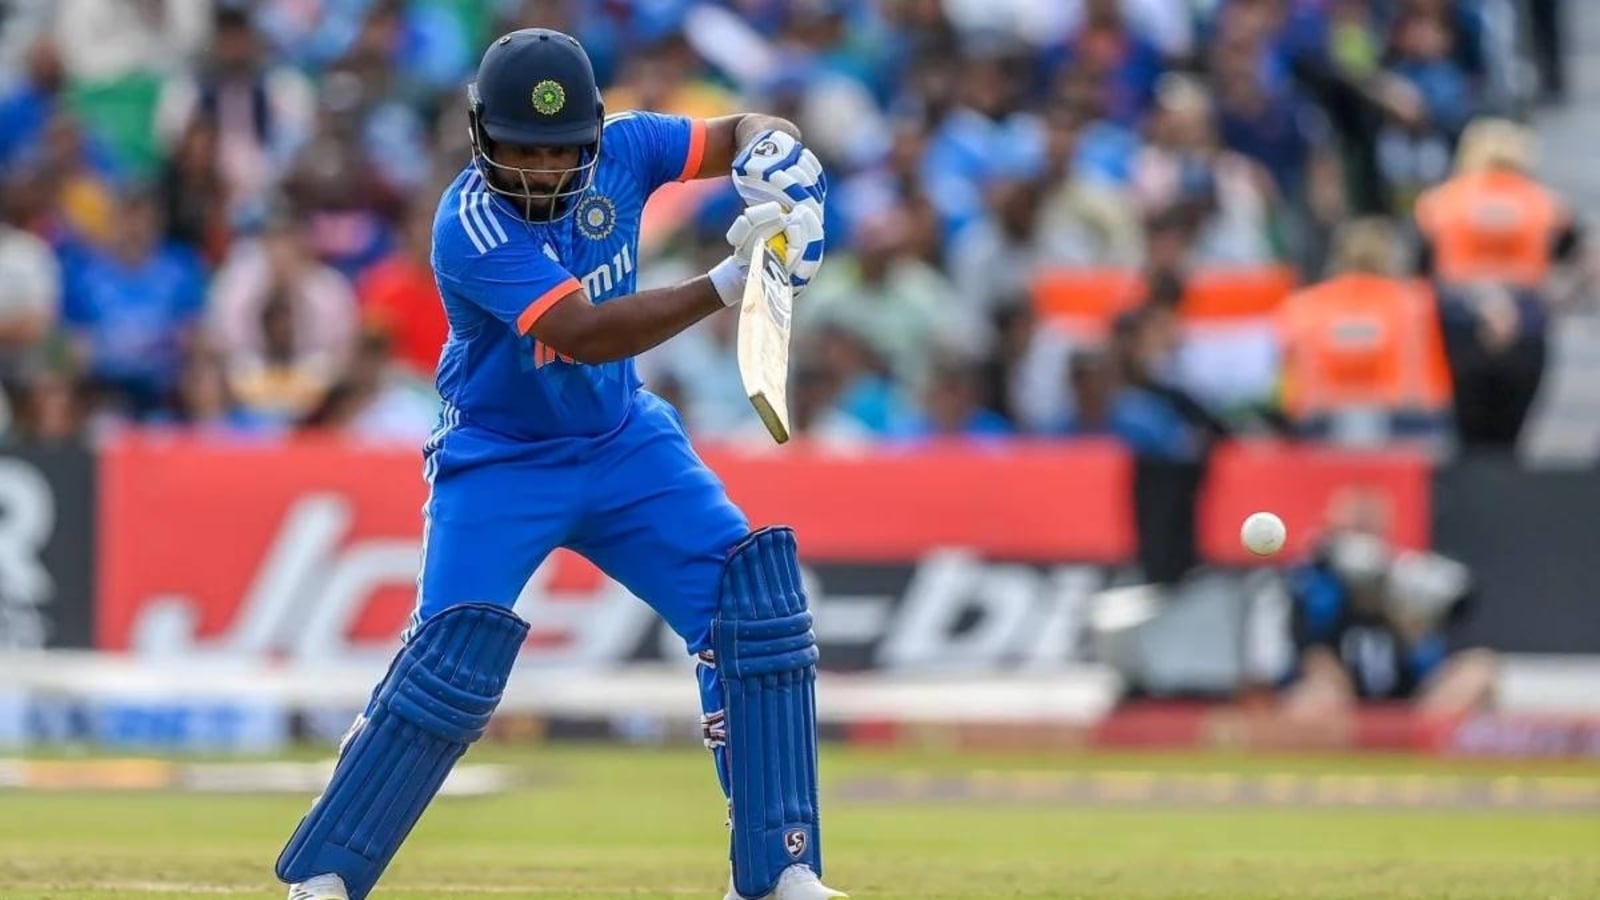 ICC Cricket World Cup 2023: Sanju Samson Misses Out, This Picture Sums Up His Emotions